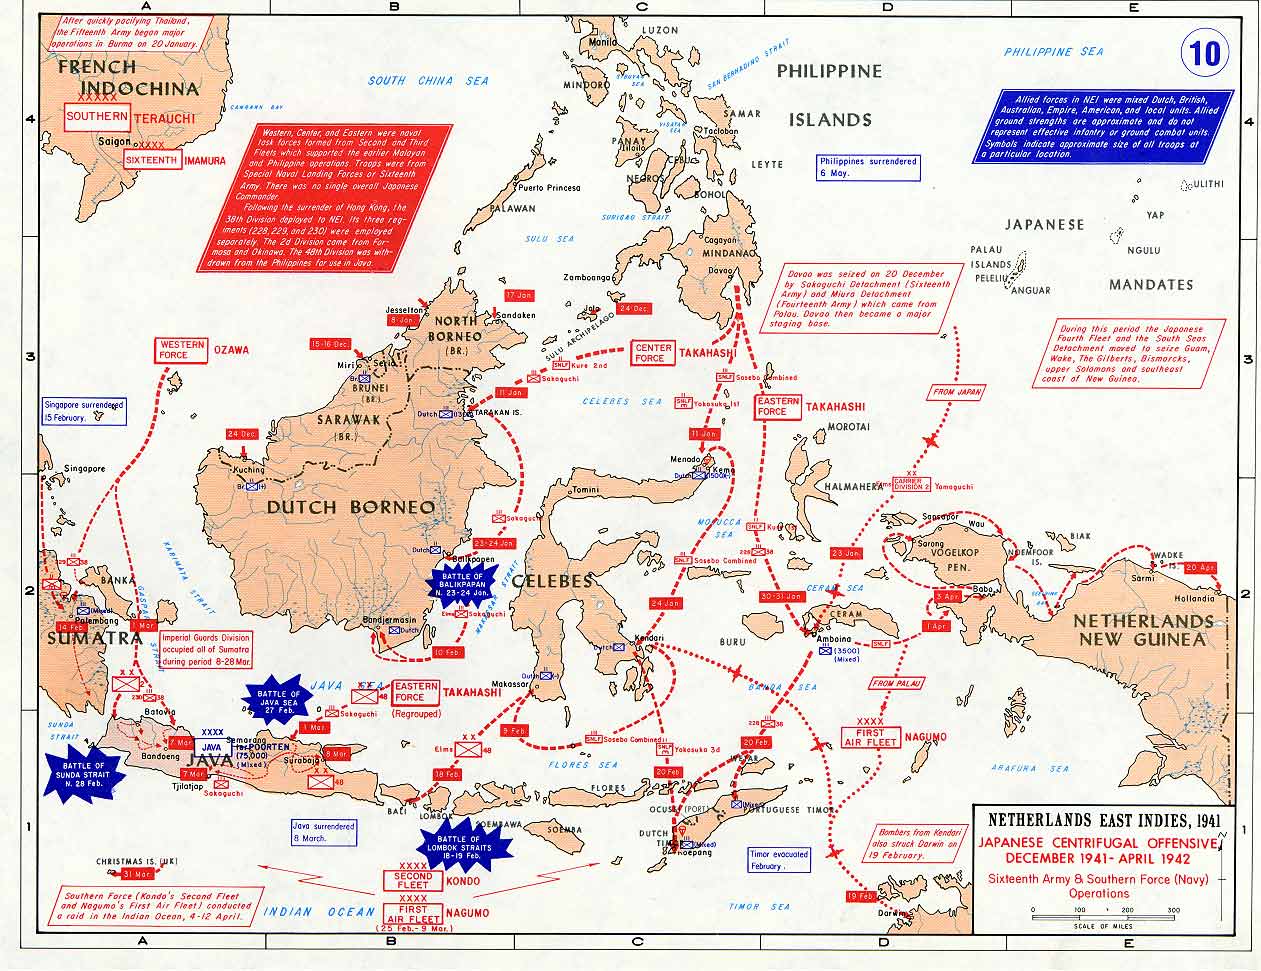 Map showing Japanese offensives in the Dutch East Indies, Dec 1941-Apr 1942